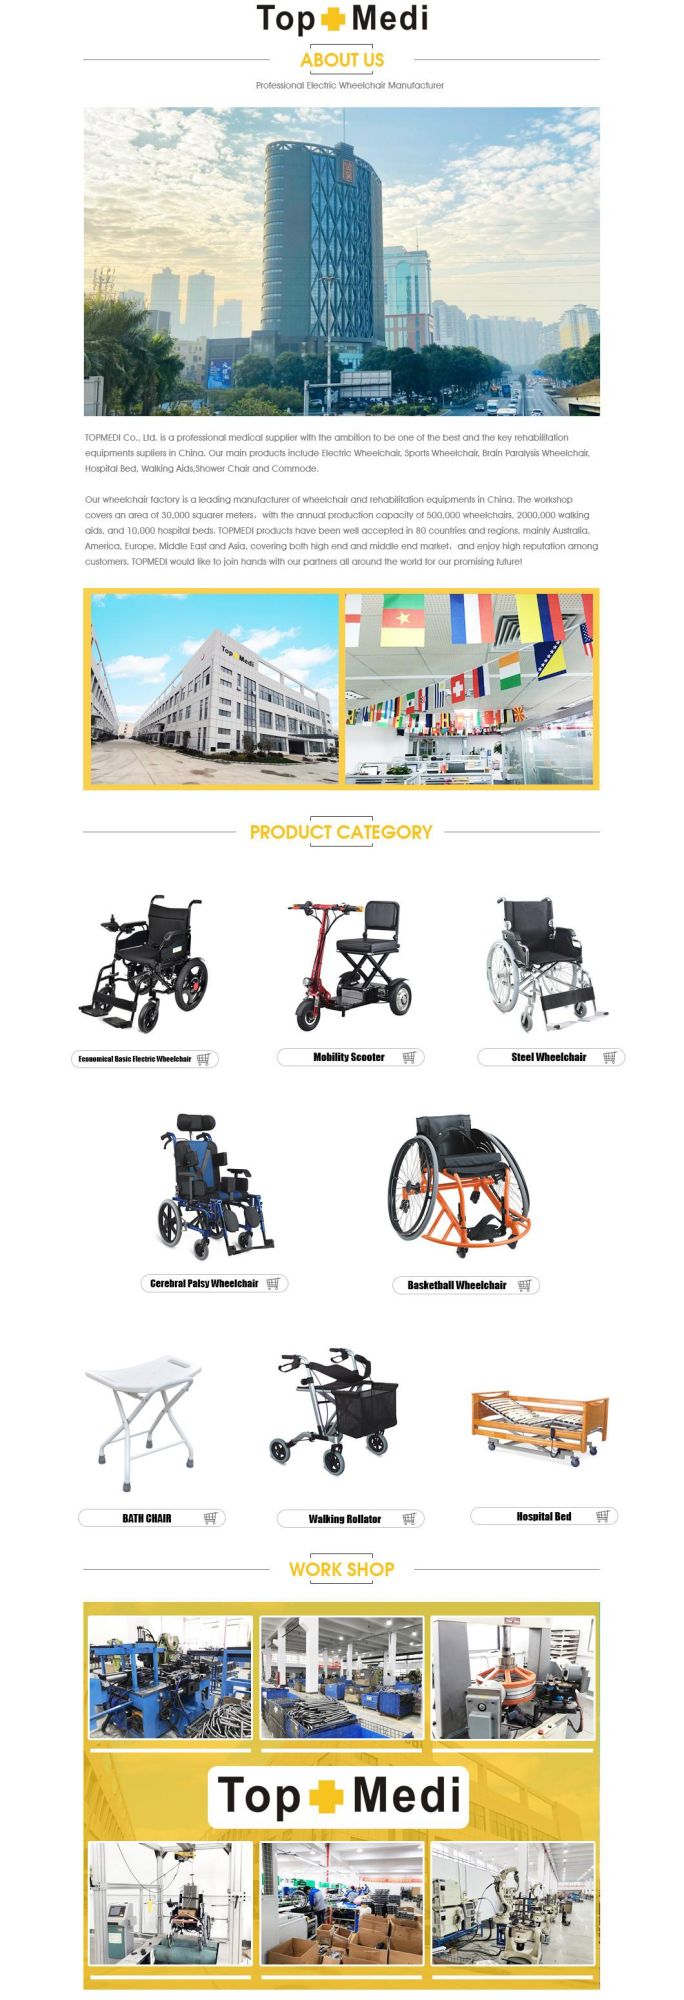 Folding Elderly Commode Wheelchairs Transferring Patient to Lifting Mechanism Transfer Wheelchair New